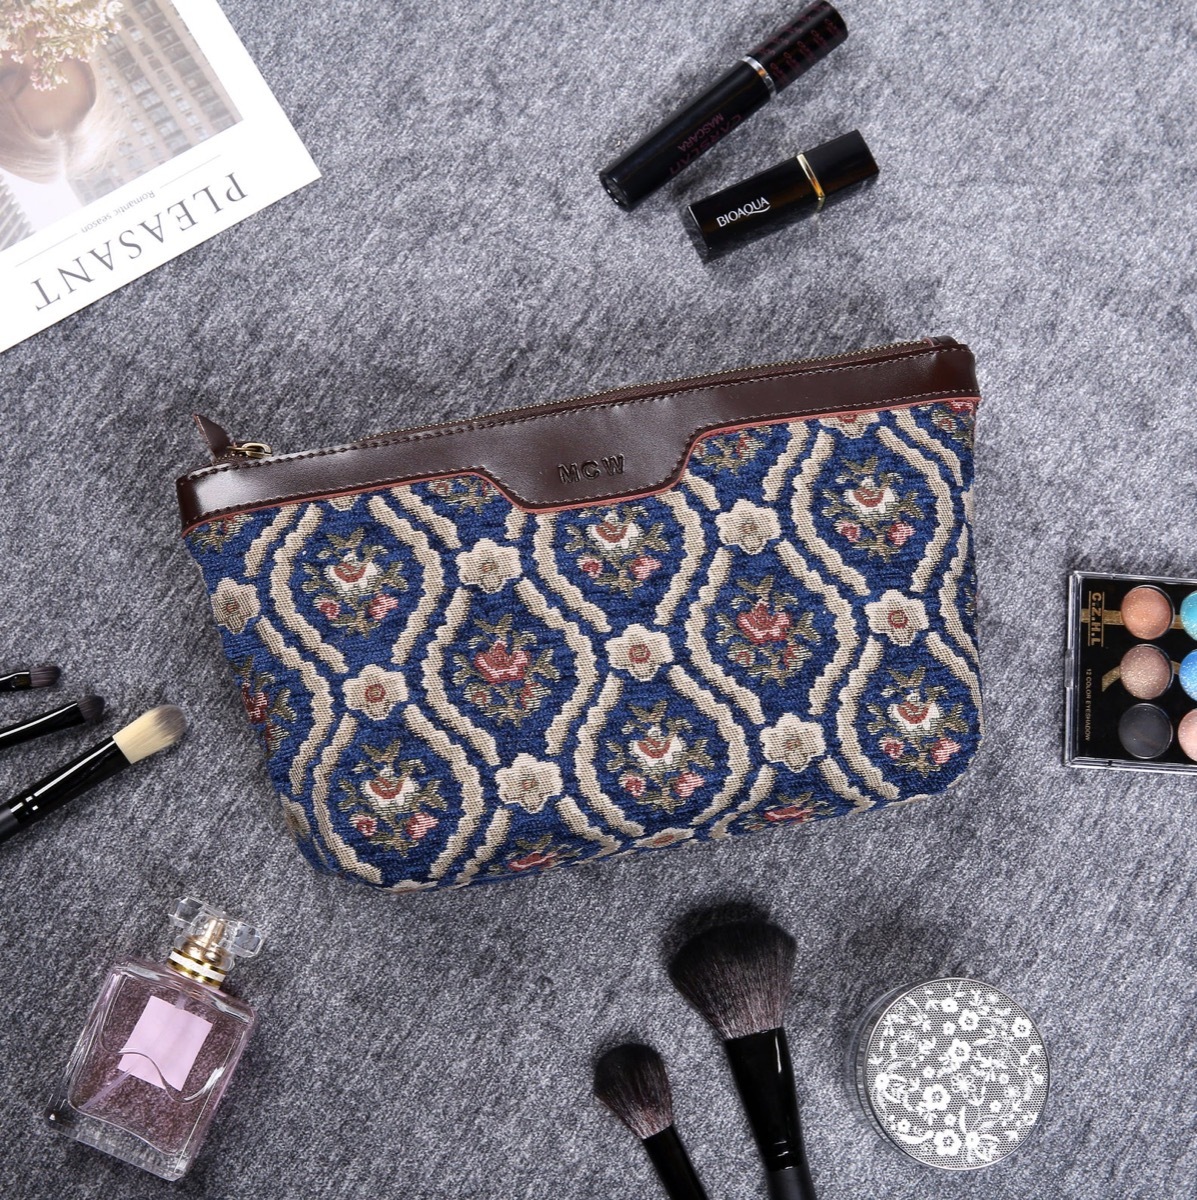 Blue vintage print bag surrounded by beauty products